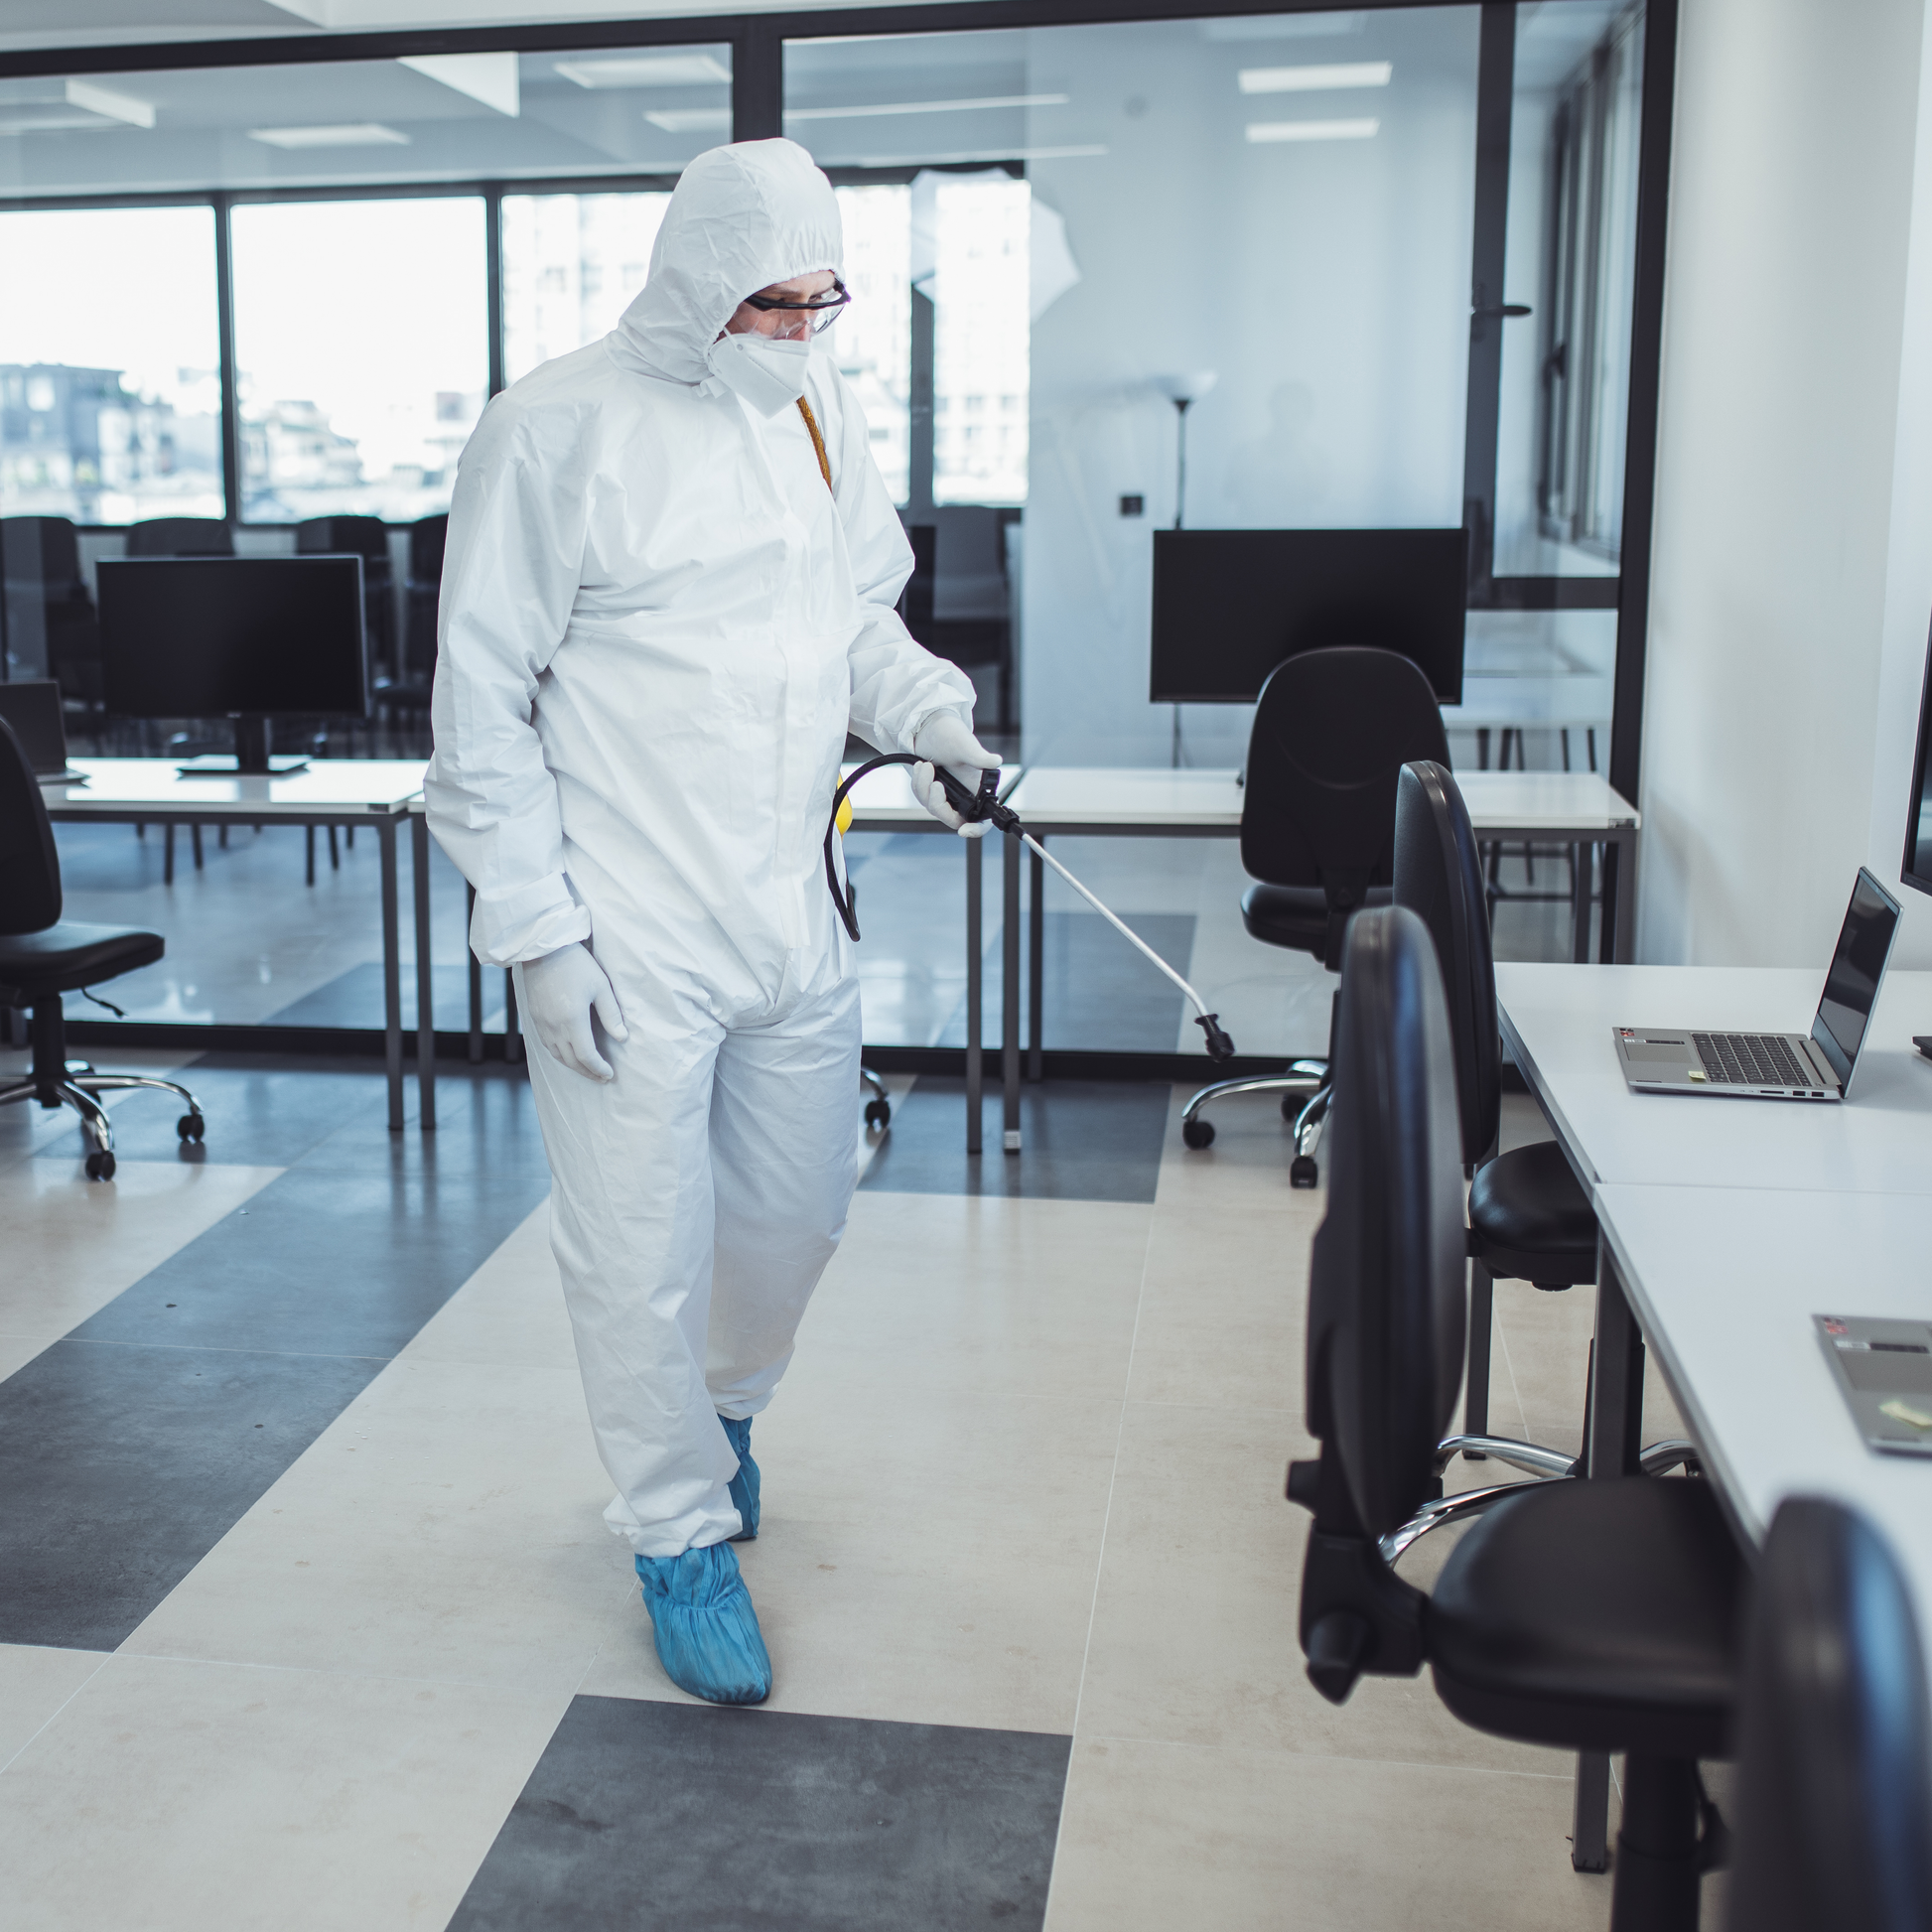 Microporous Protective Tyvek Coverall Suits in use